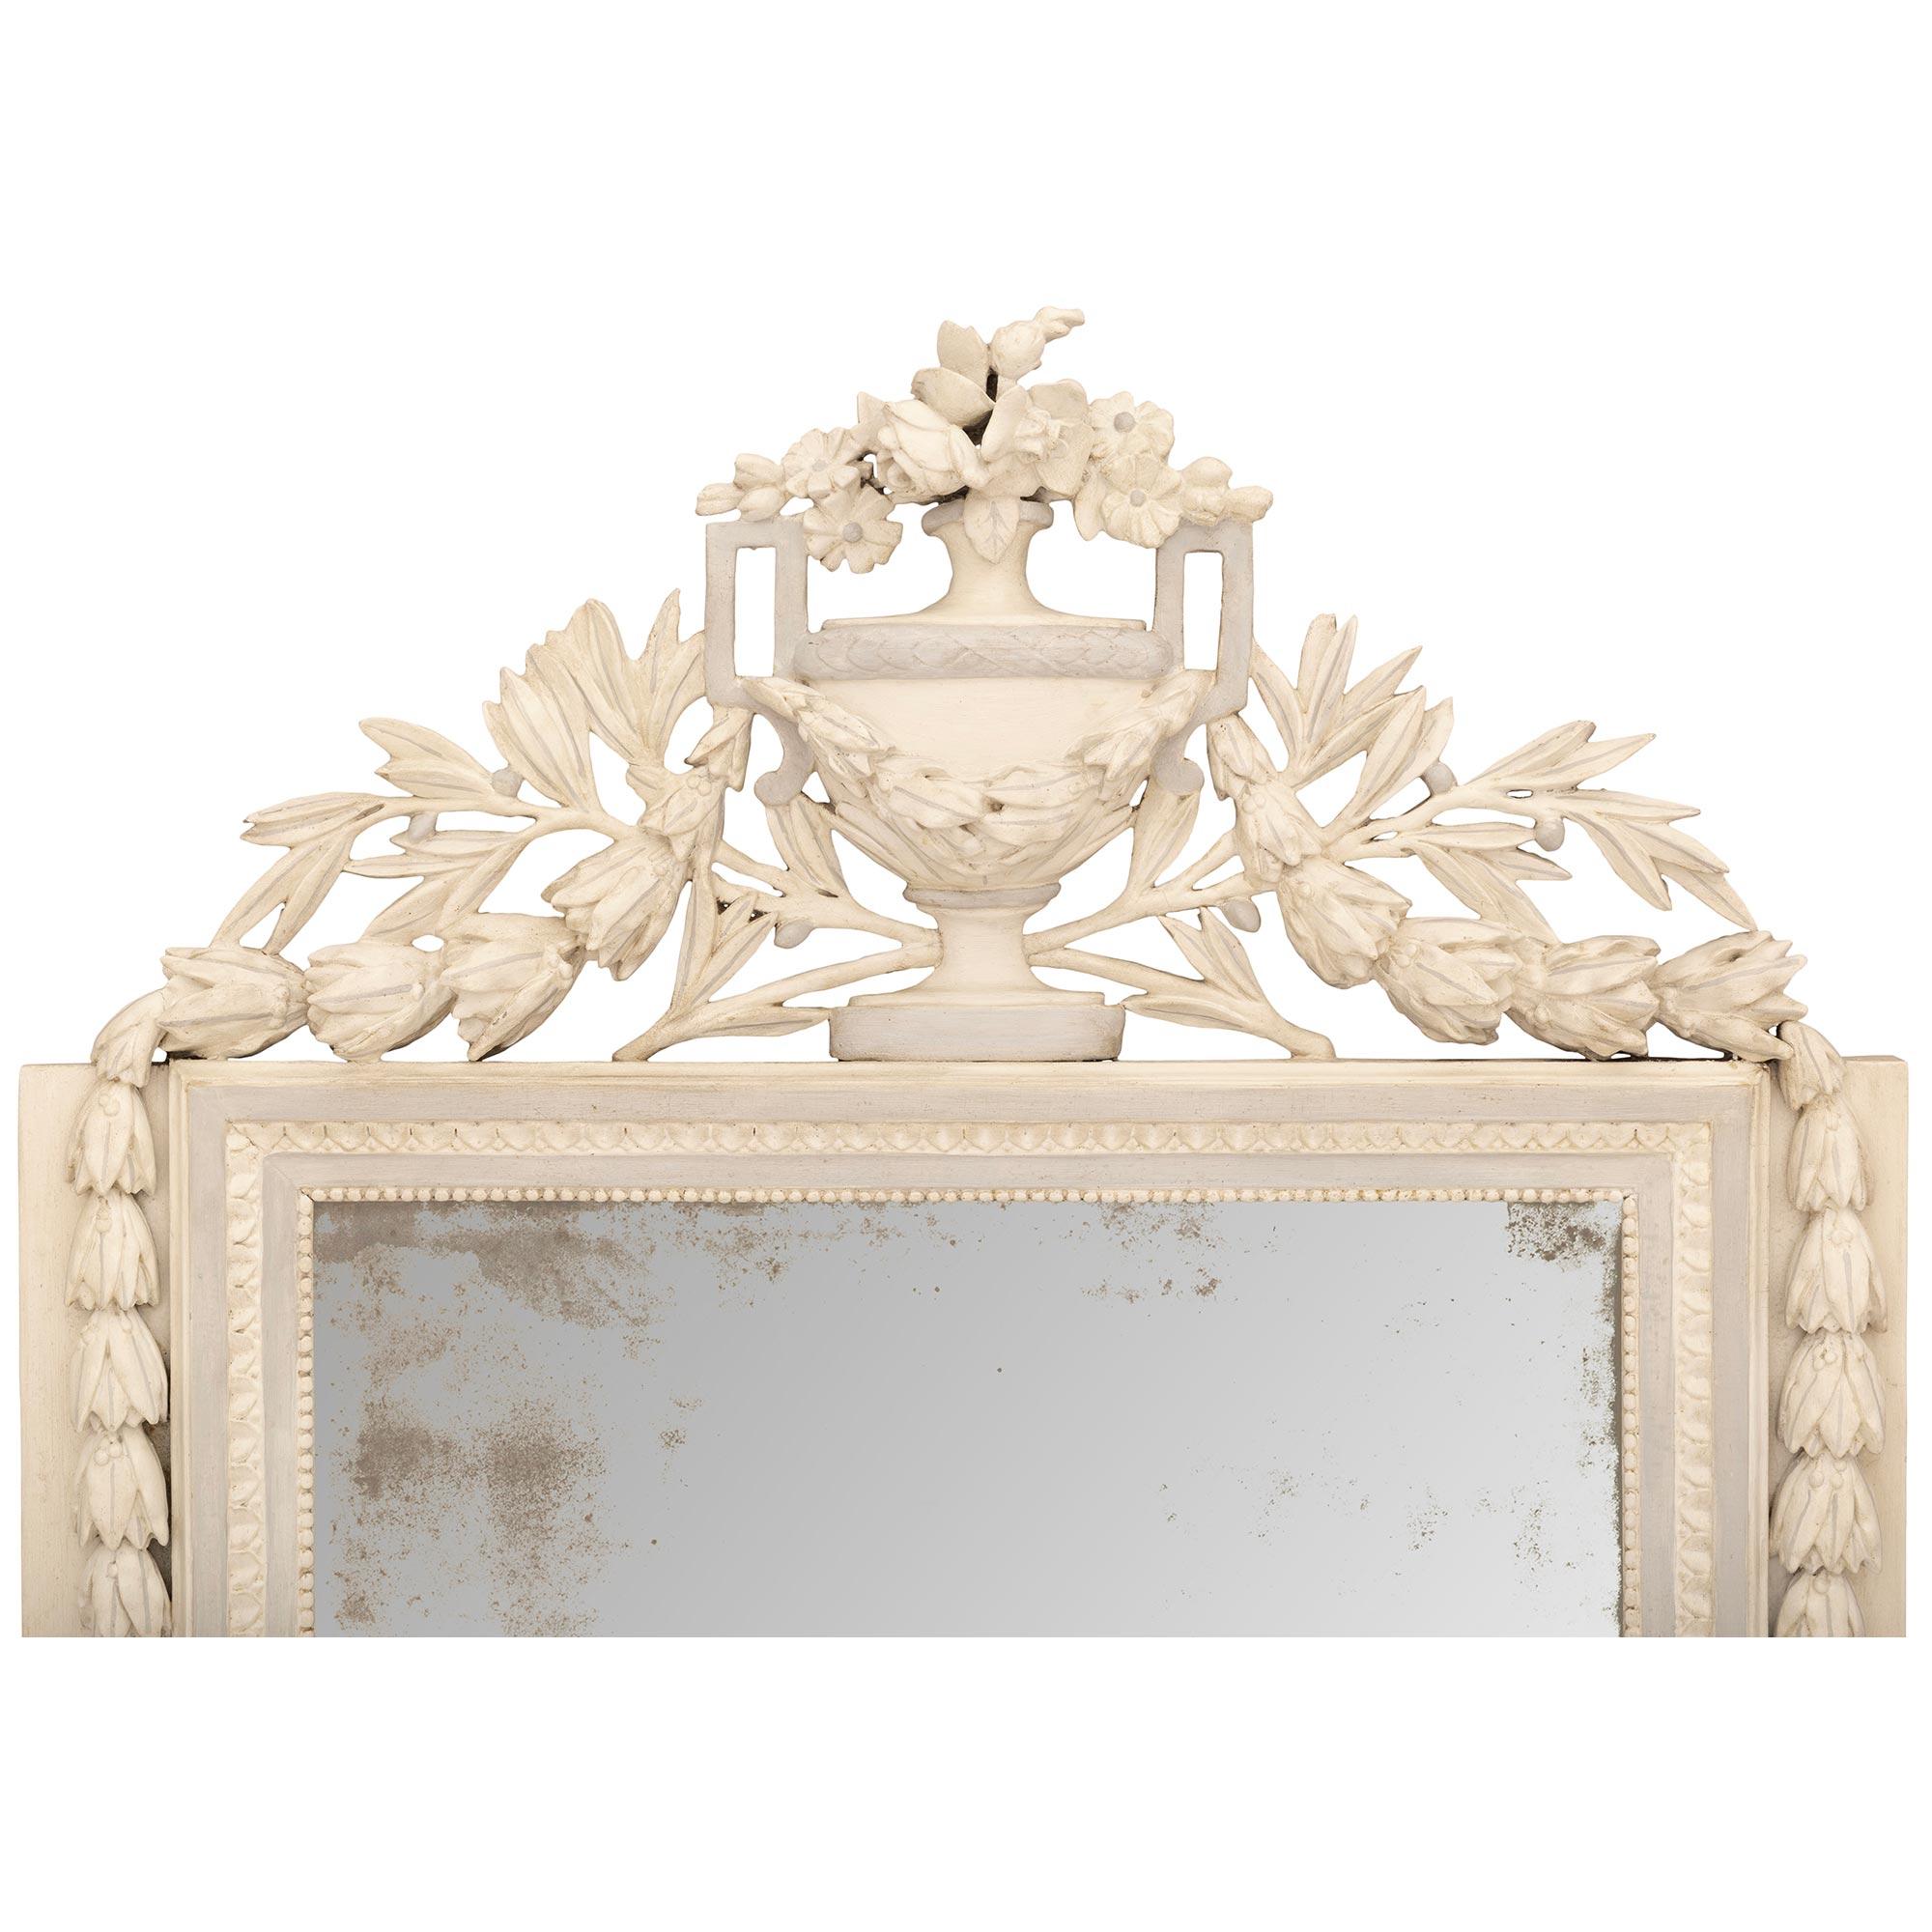 A unique and most decorative French 18th century Louis XVI Period patinated wood mirror. The original mirror plate is set within a patinated off white frame, and is supported from the base corners by isolated rosettes encased within quarterly etched